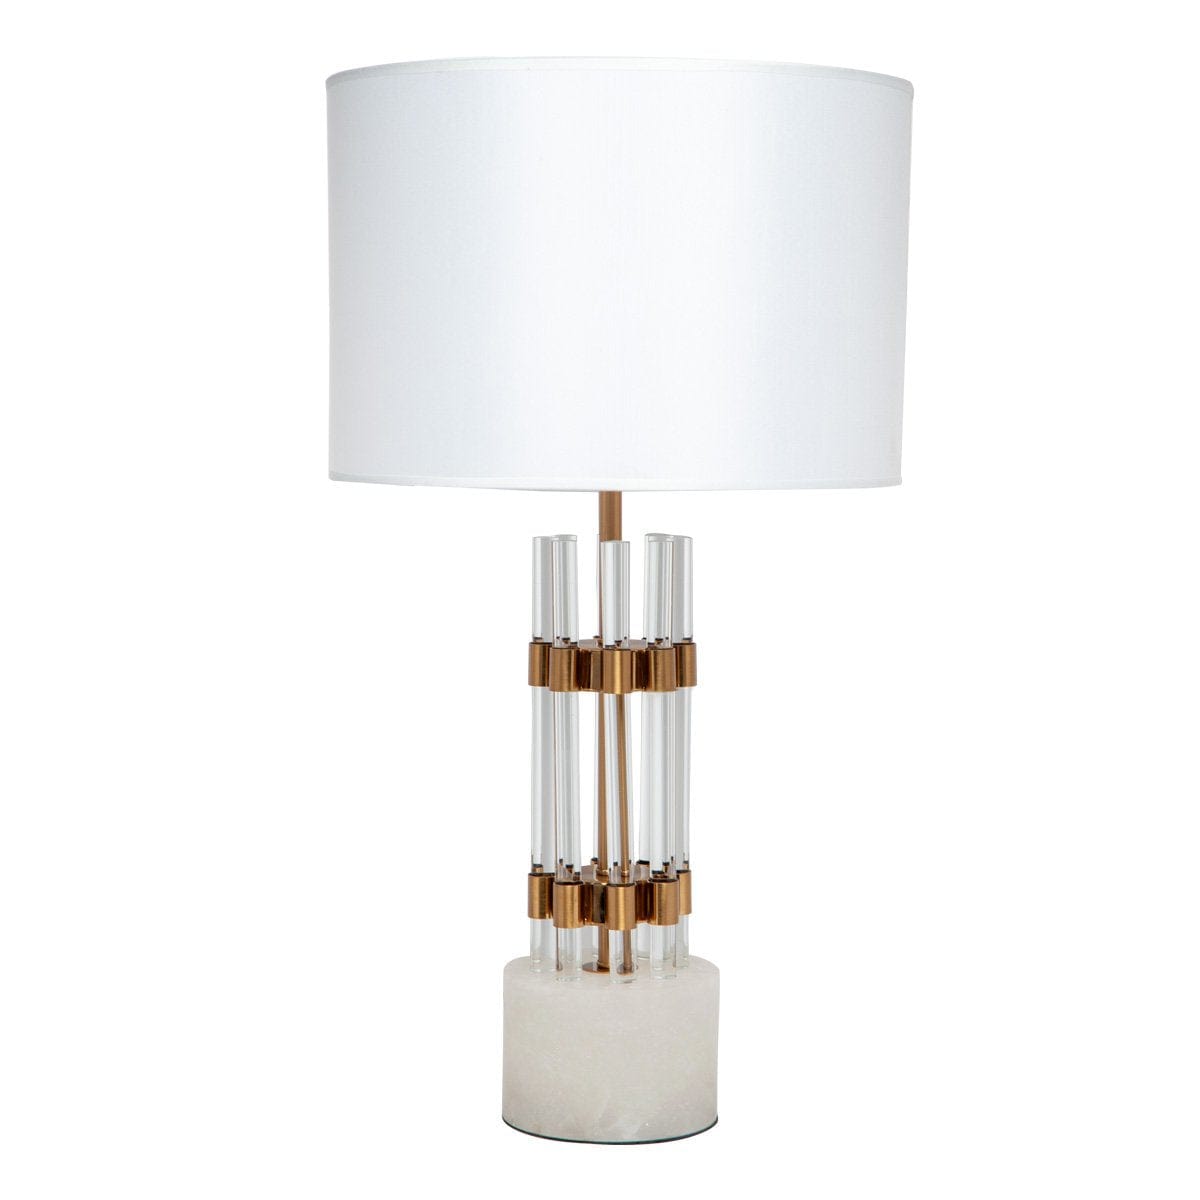 CAFE LIGHTING & LIVING Table Lamp Abbey Table Lamp B13317